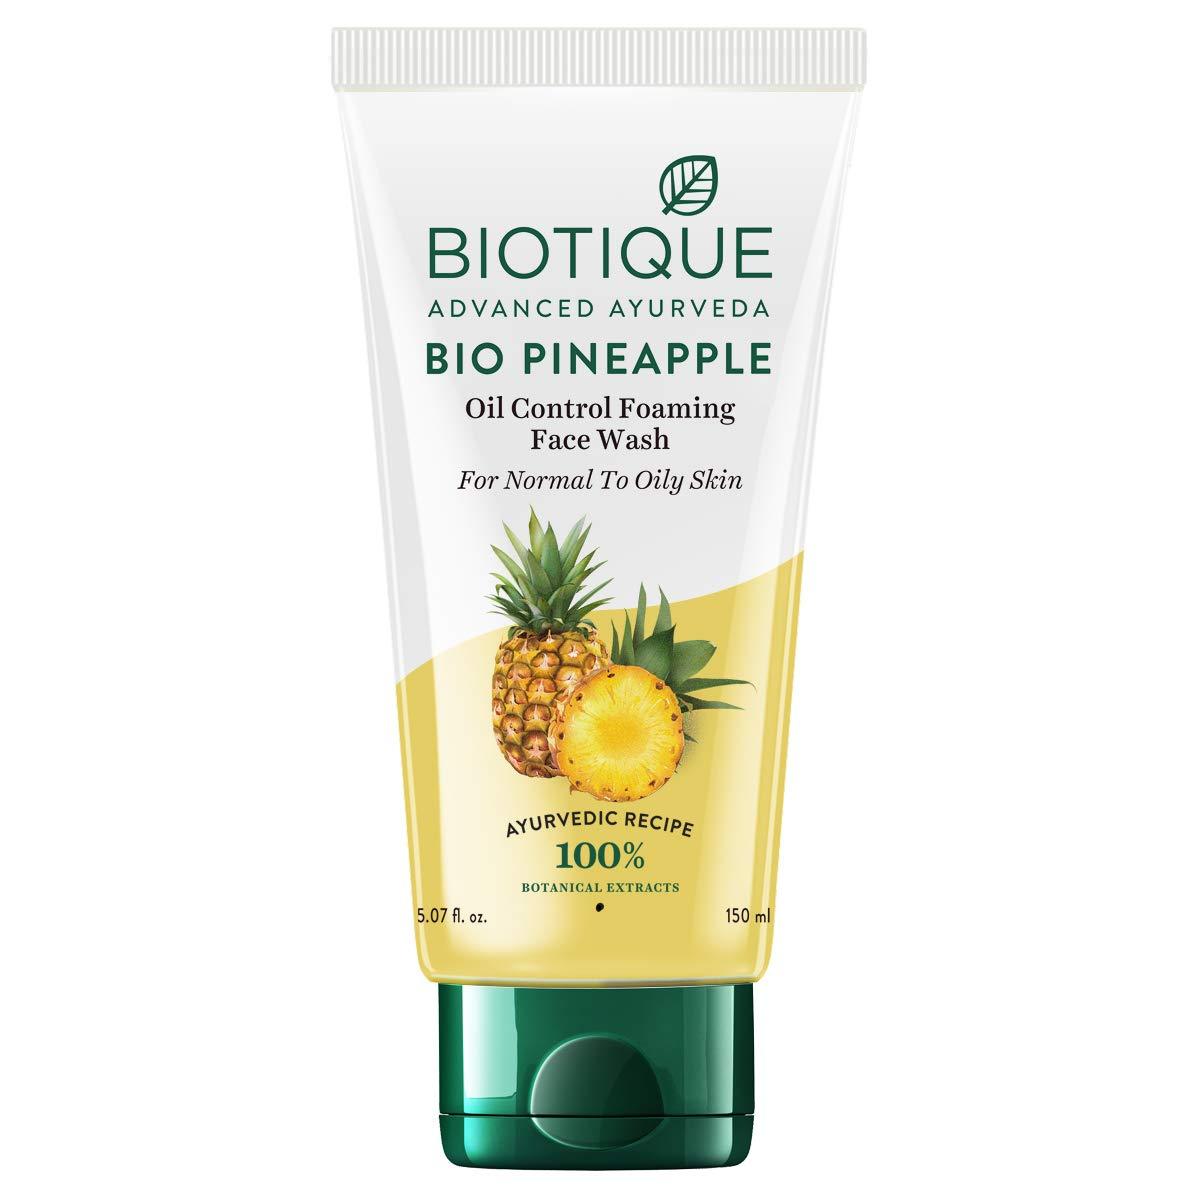 Bio Pineapple Oil Control Foaming Face Cleanser